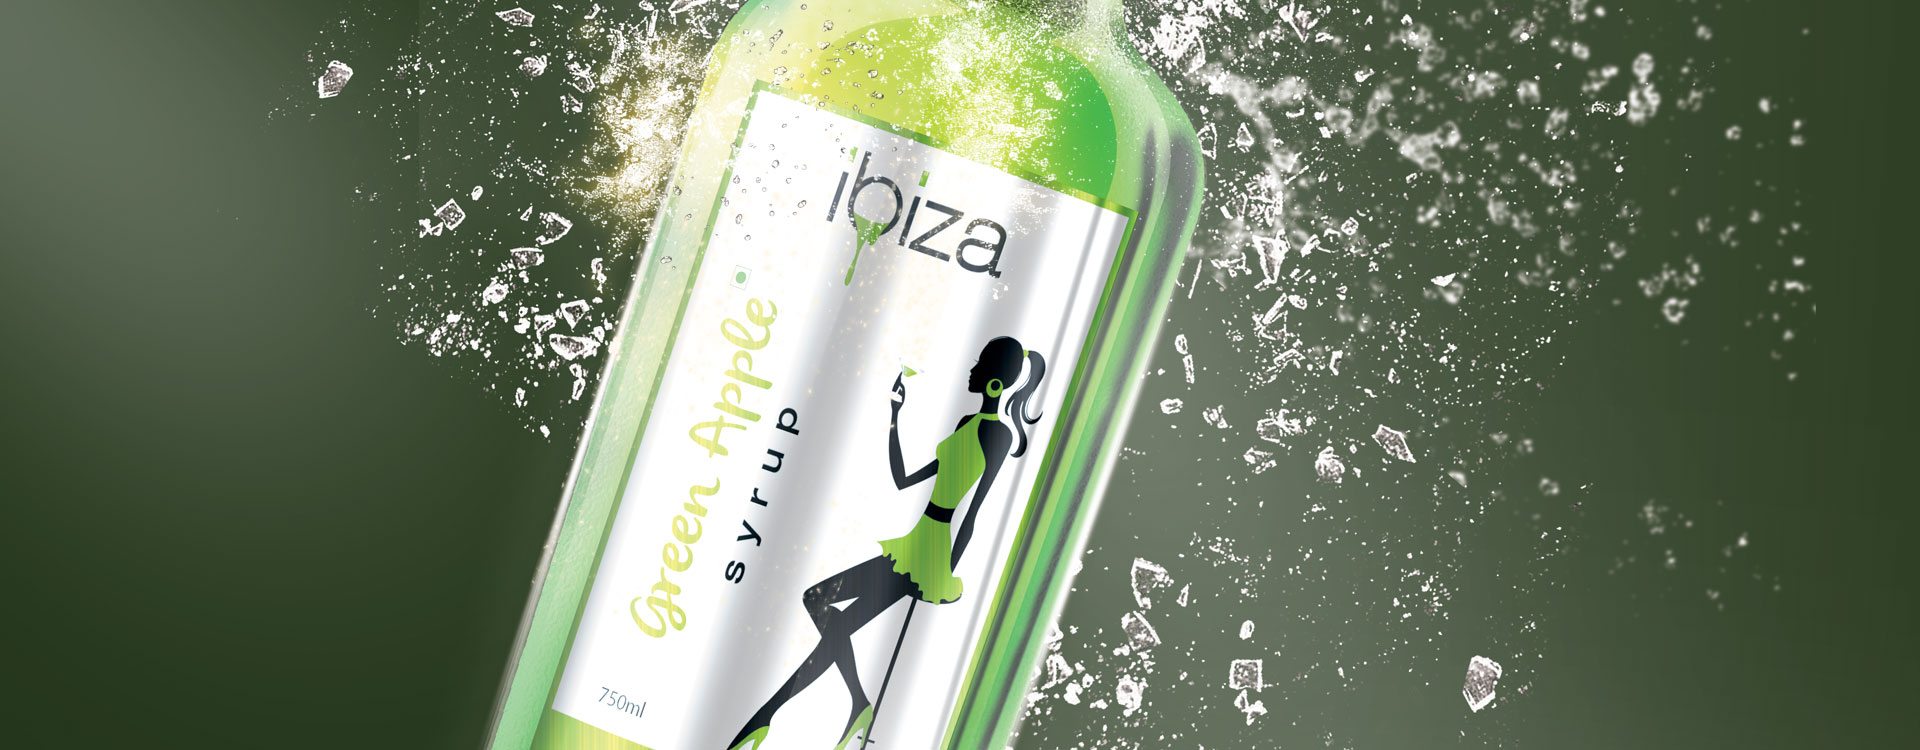 Packaging design for ibiza